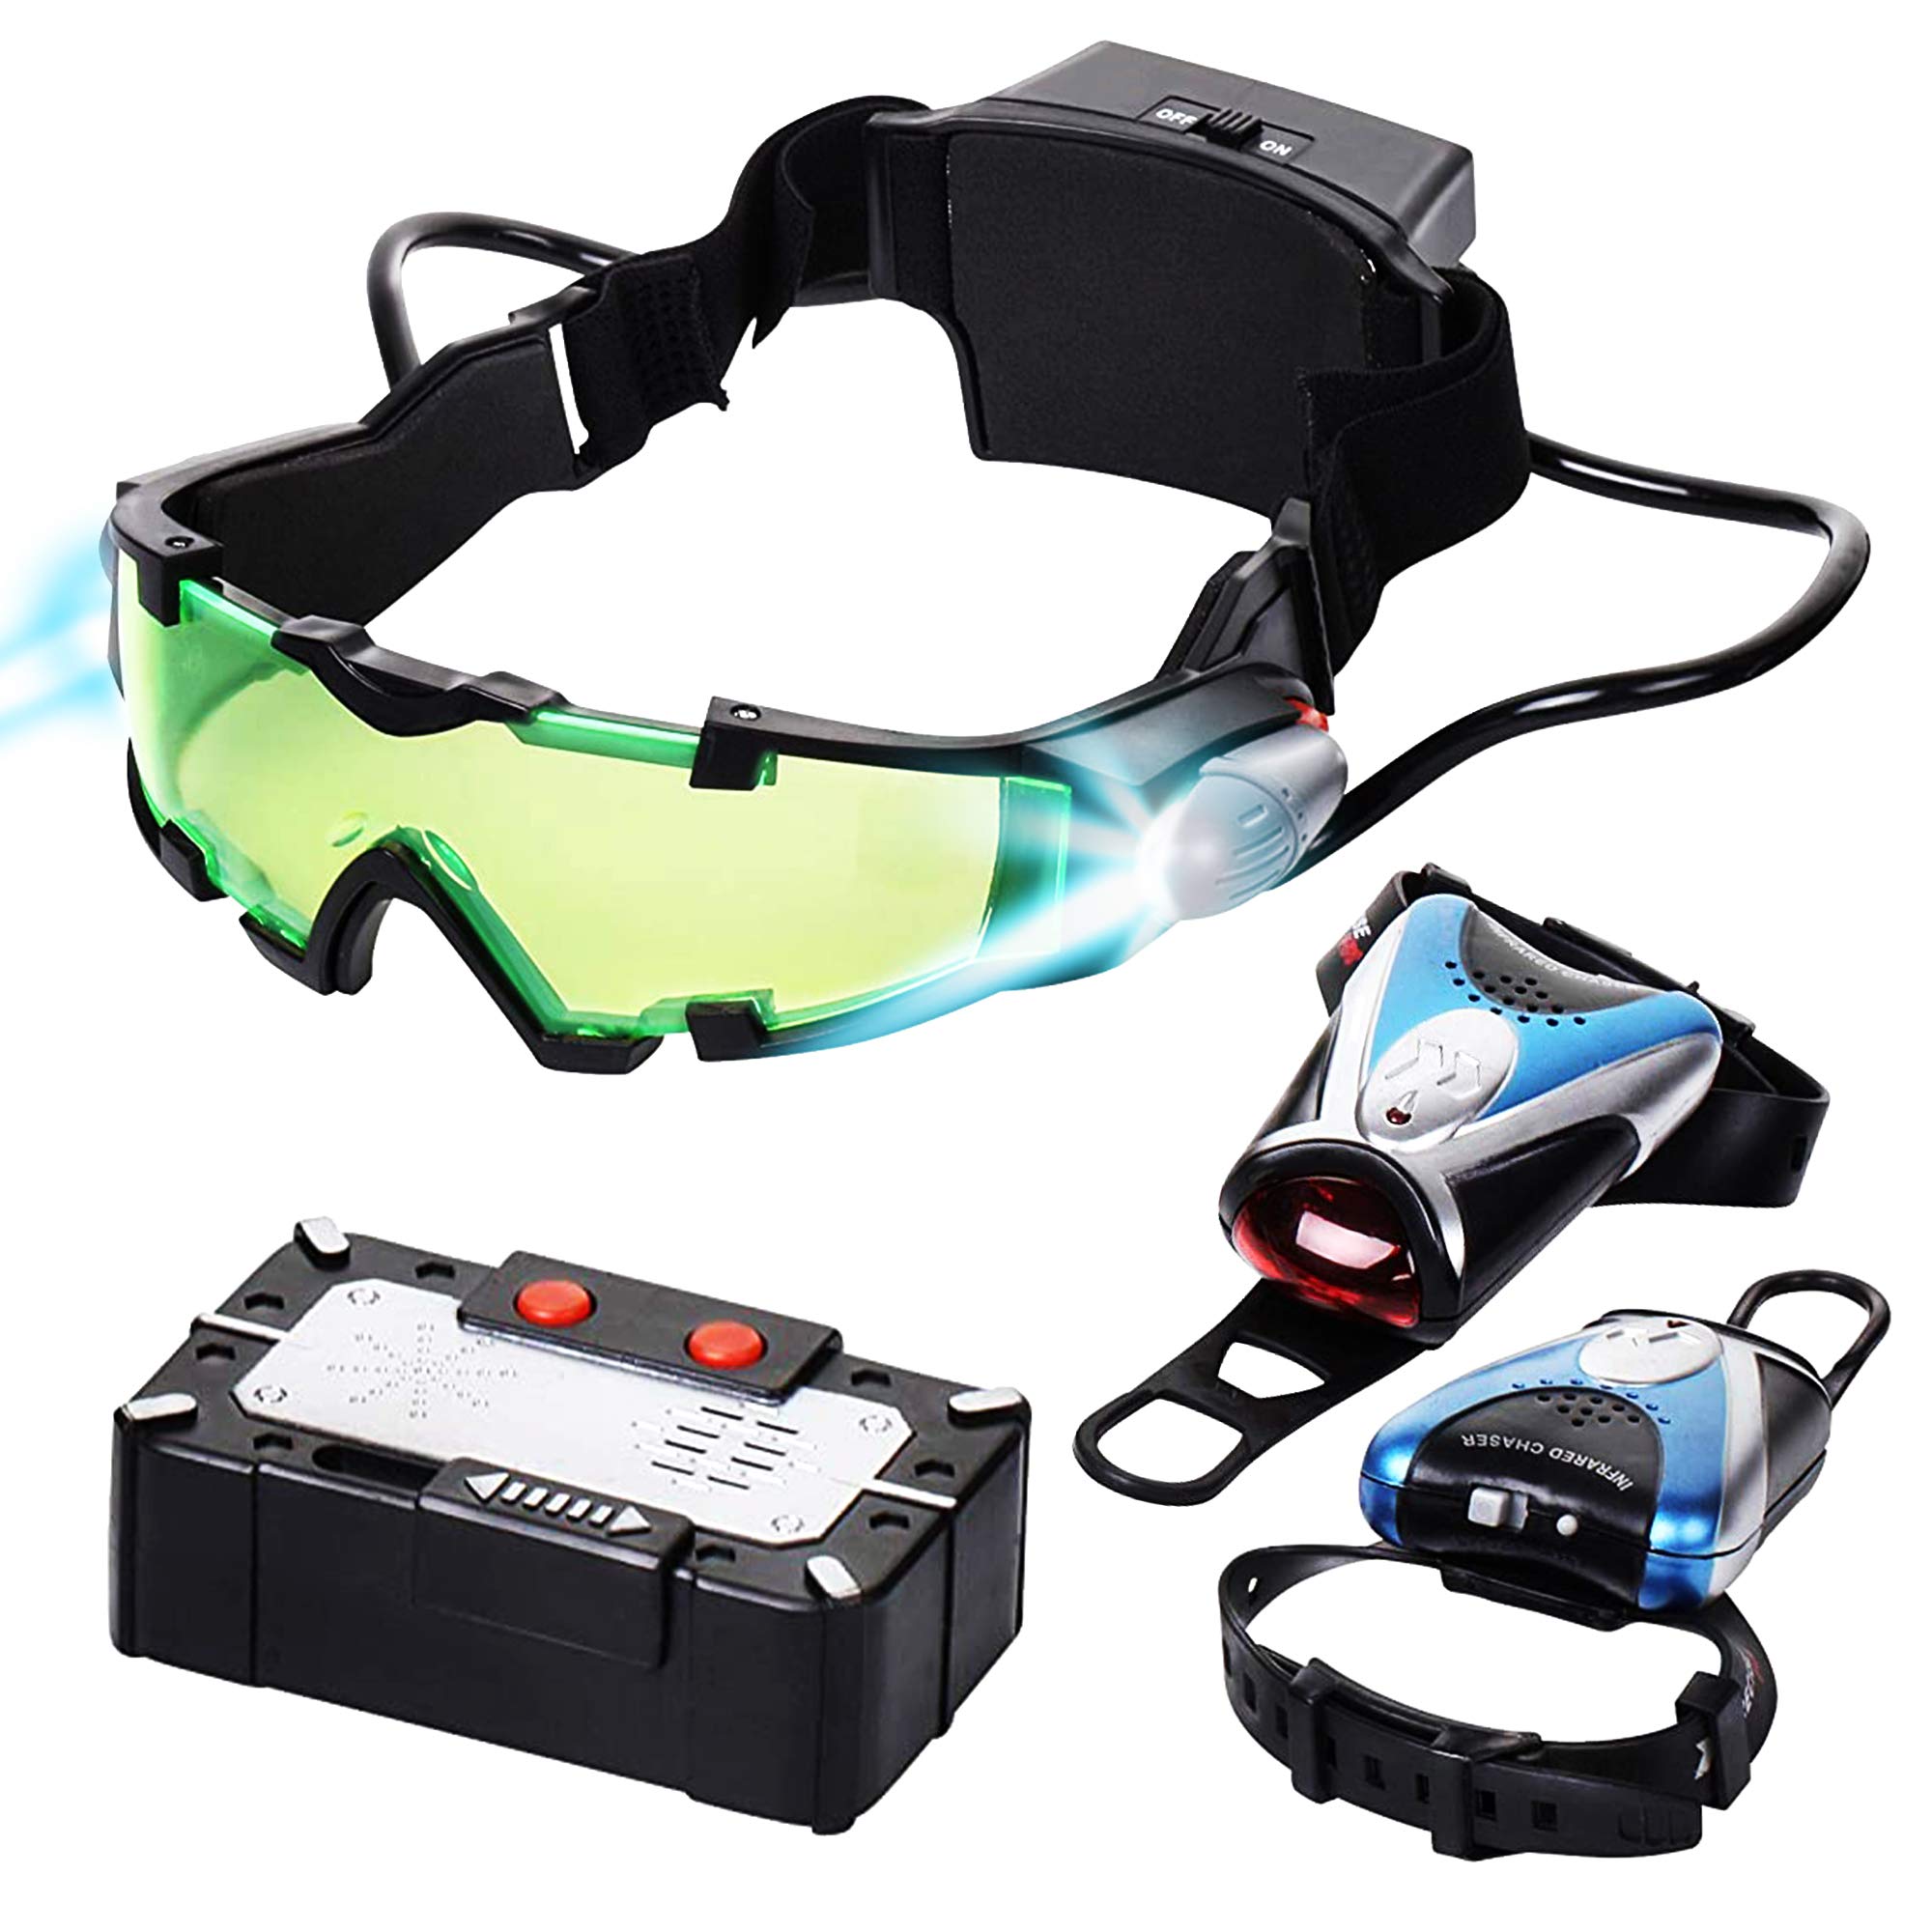 Dazmers Spy Kit gear Set for Kids - cool Spy gadgets Kit - Night Vision  goggles, Micro Voice Disguiser, Infrared chaser Equipment - Surv